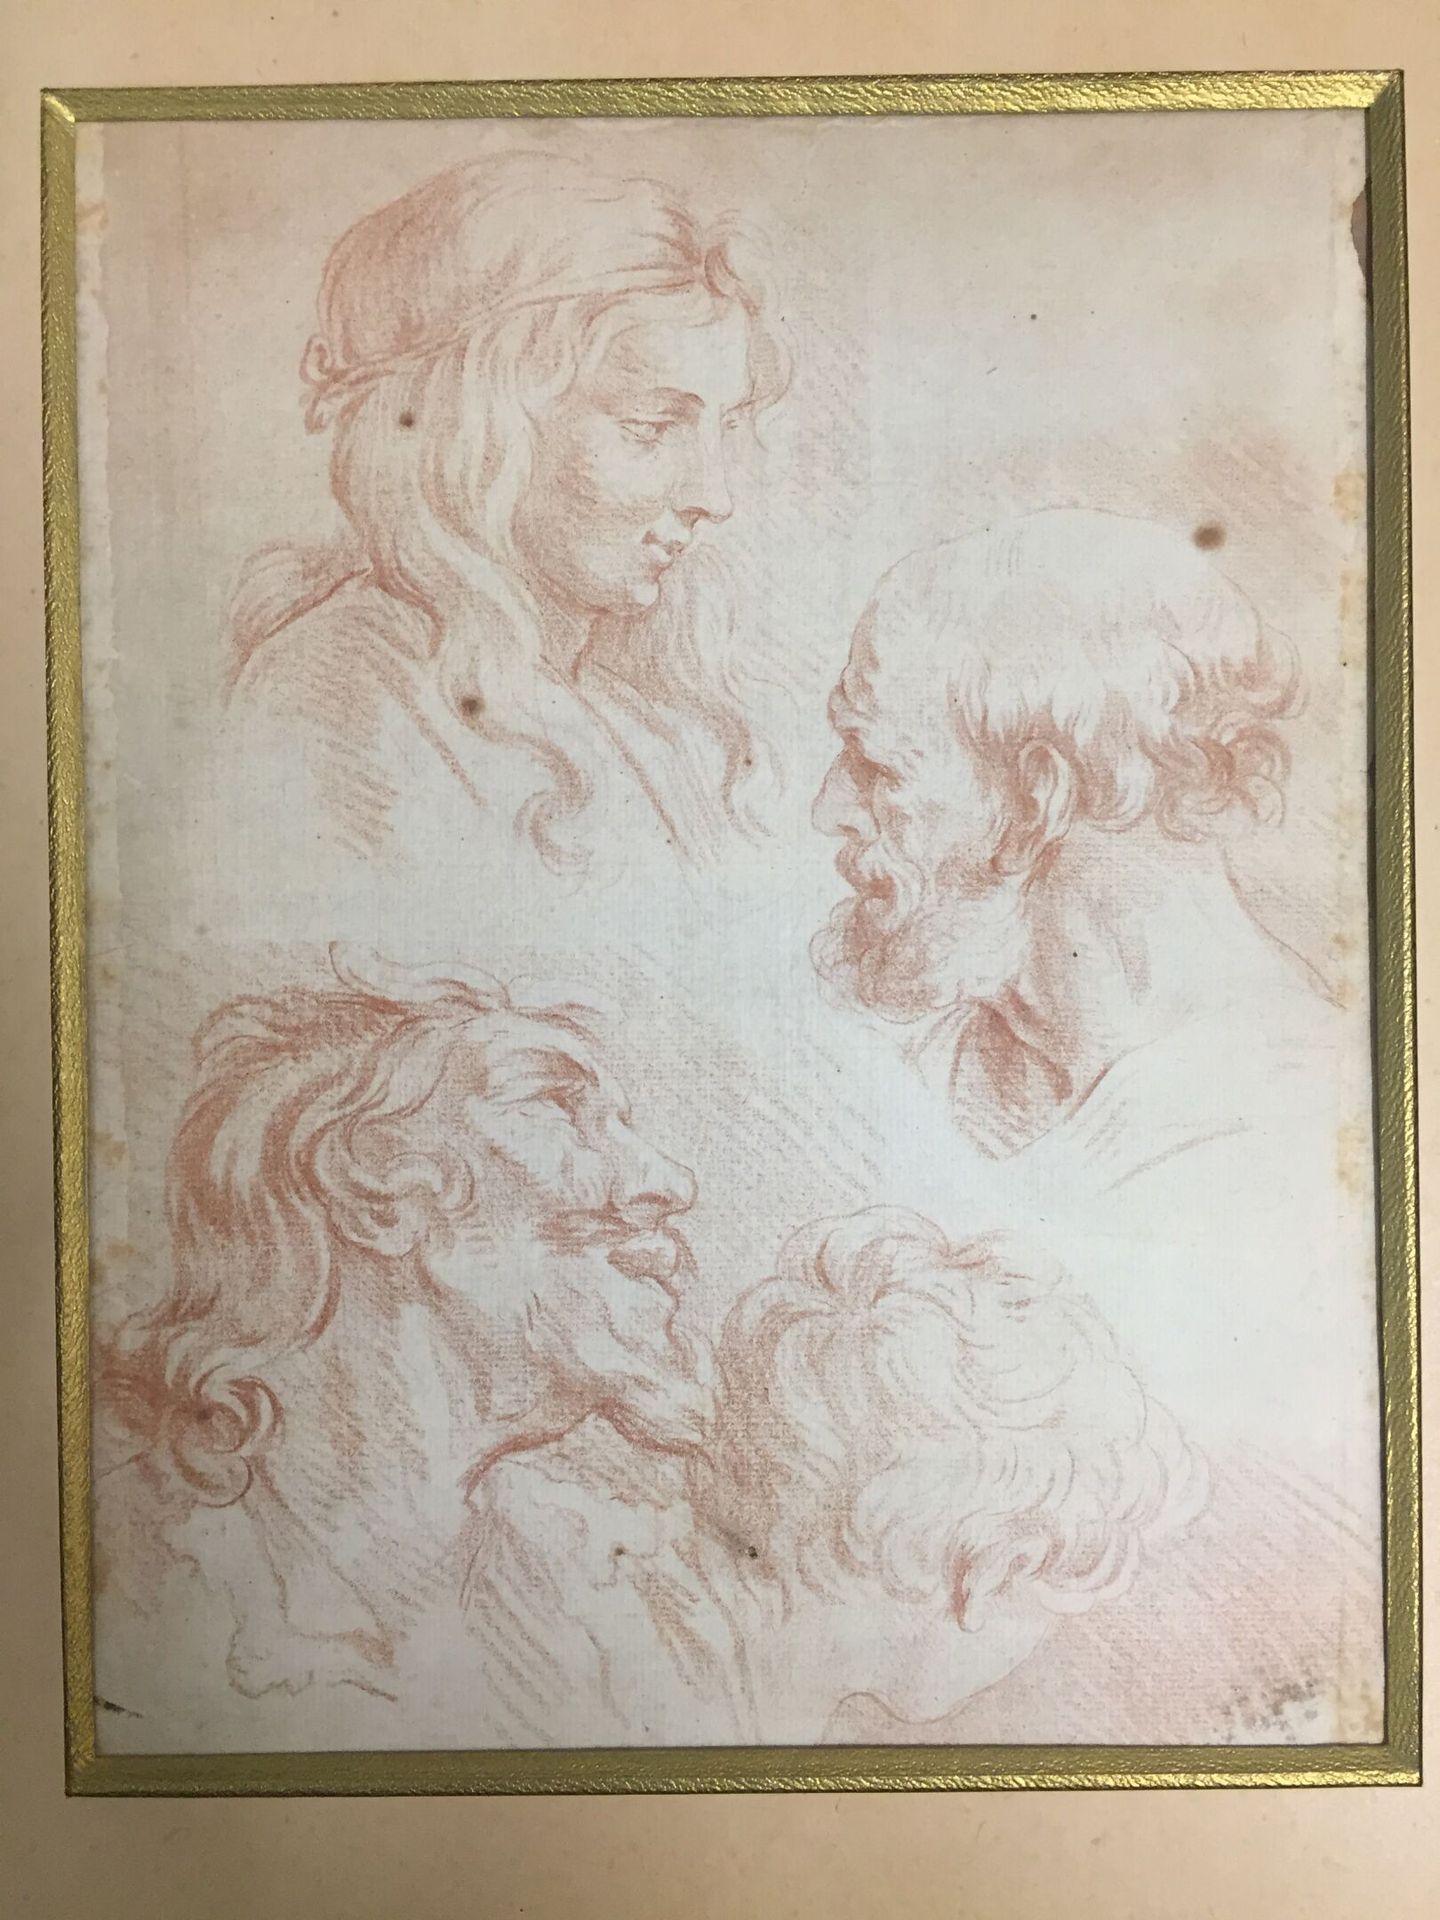 Null French school, late 18th - early 19th century

"Study of faces"

Sanguine.
&hellip;